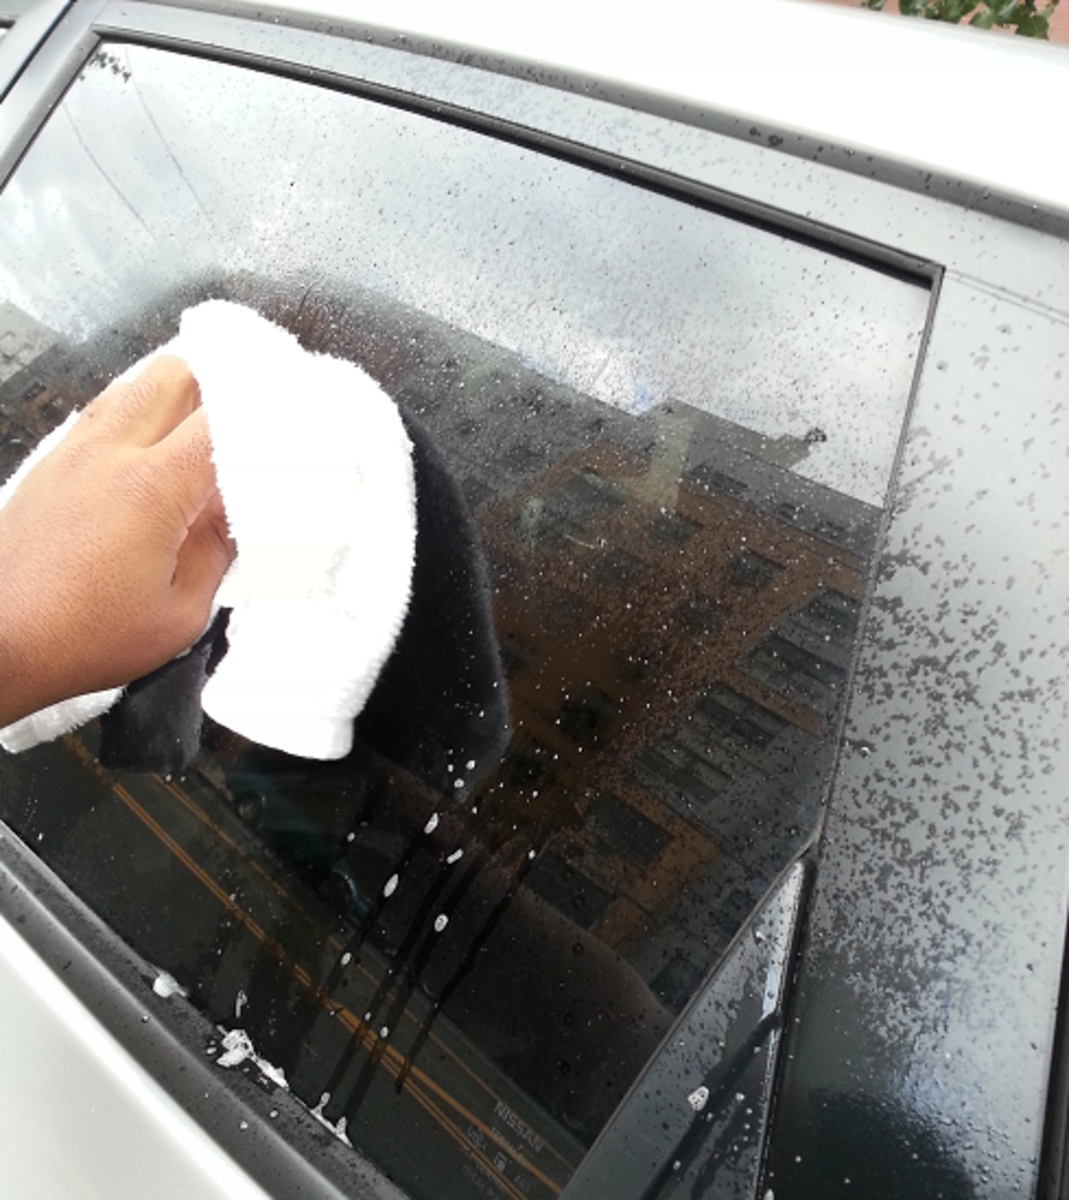 First, wash your windows.